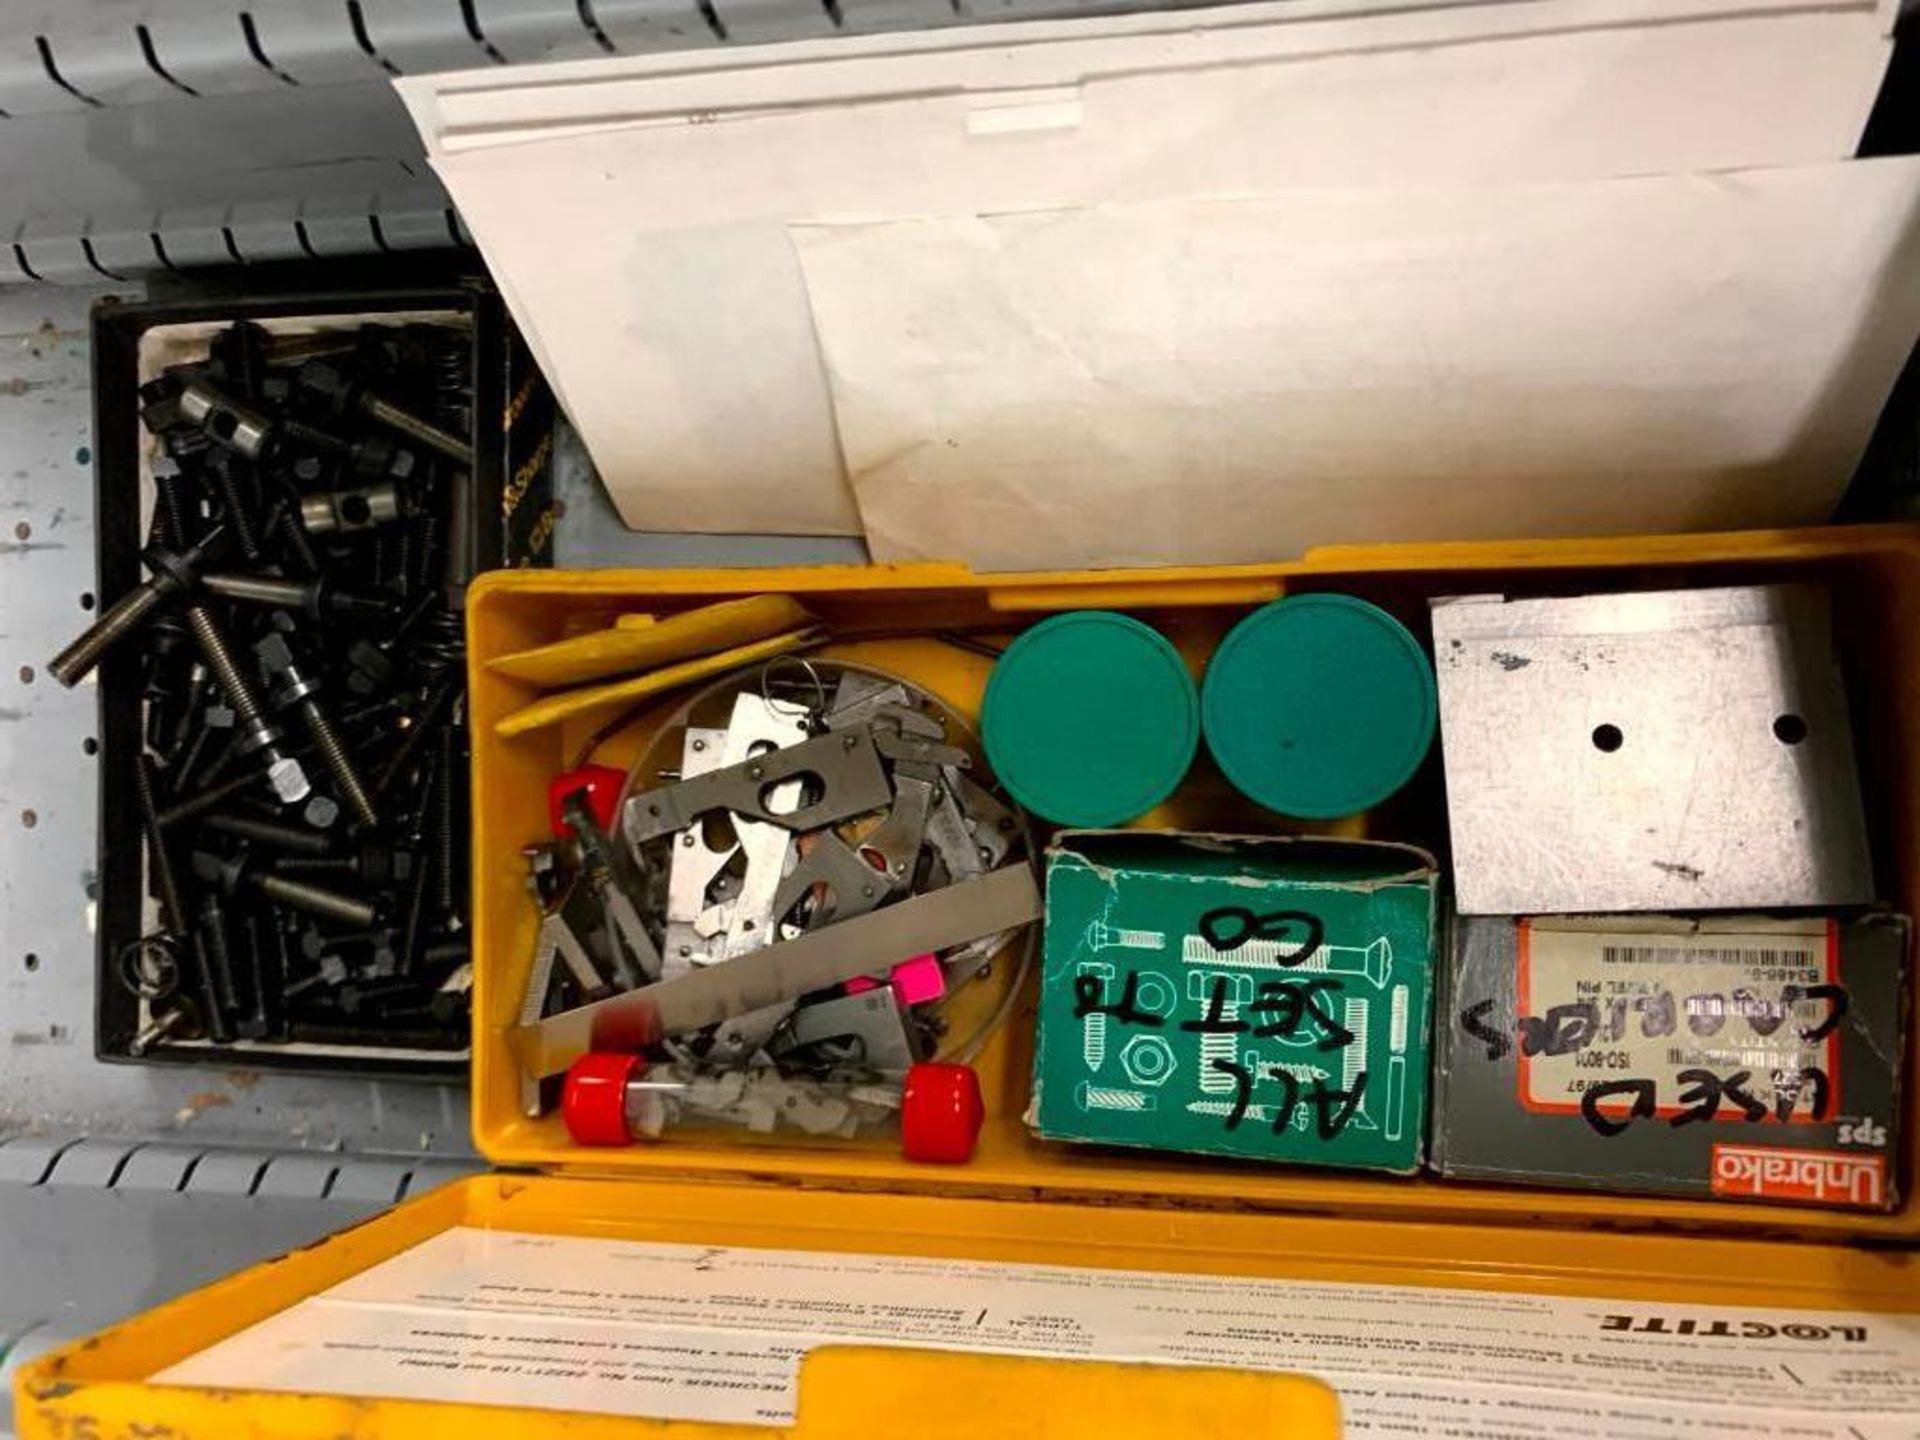 Lista 9-Drawer Cabinet: Bushings, Plugs, Ejectors, Dr-Sta-Co Clamps, Springs, Flex Cable Connectors - Image 11 of 12